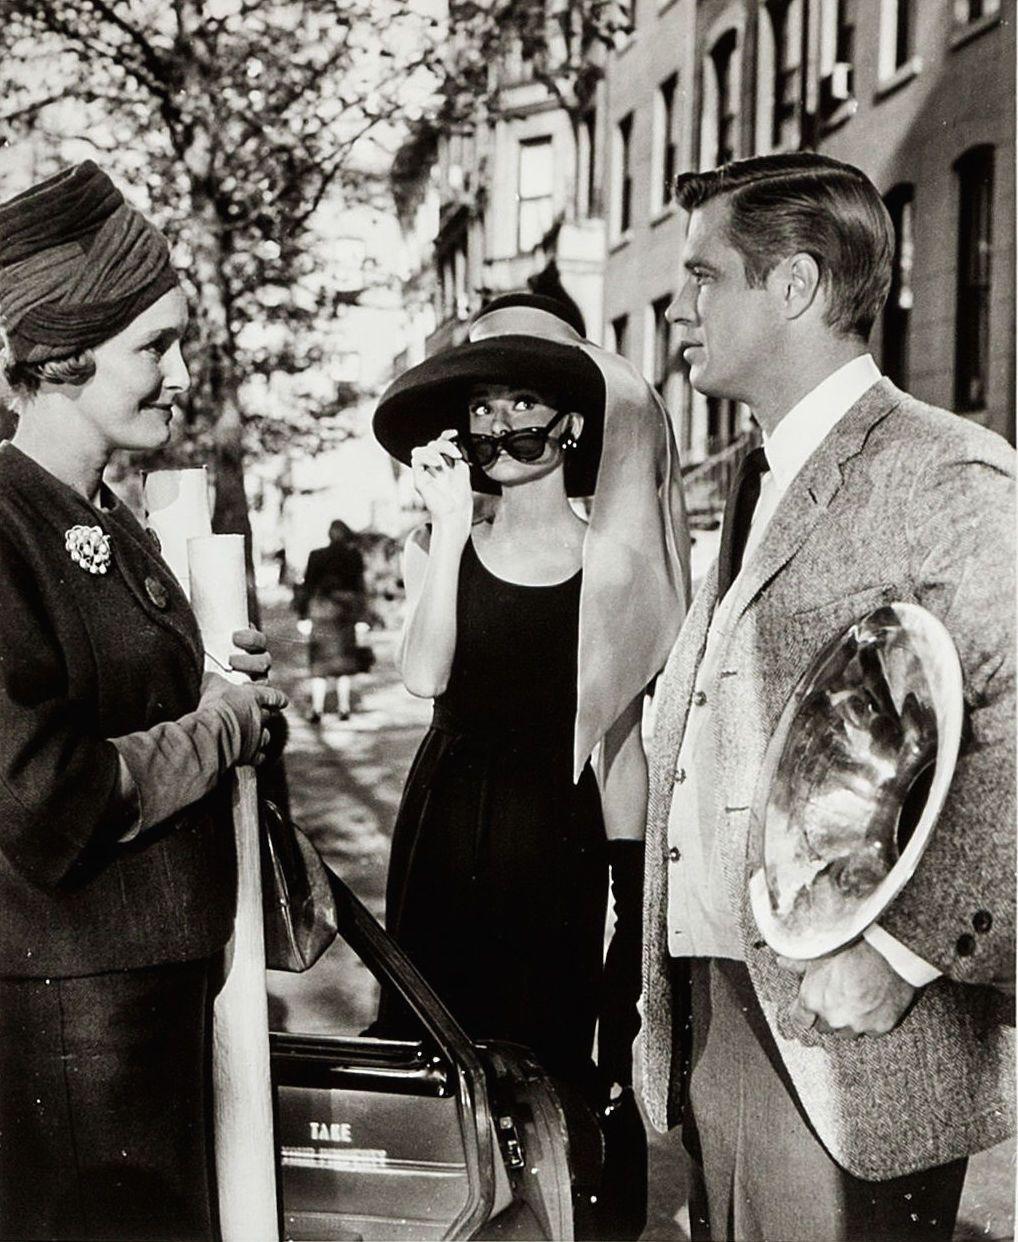 Patricia Neal, Audrey Hepburn and George Peppard in Breakfast at